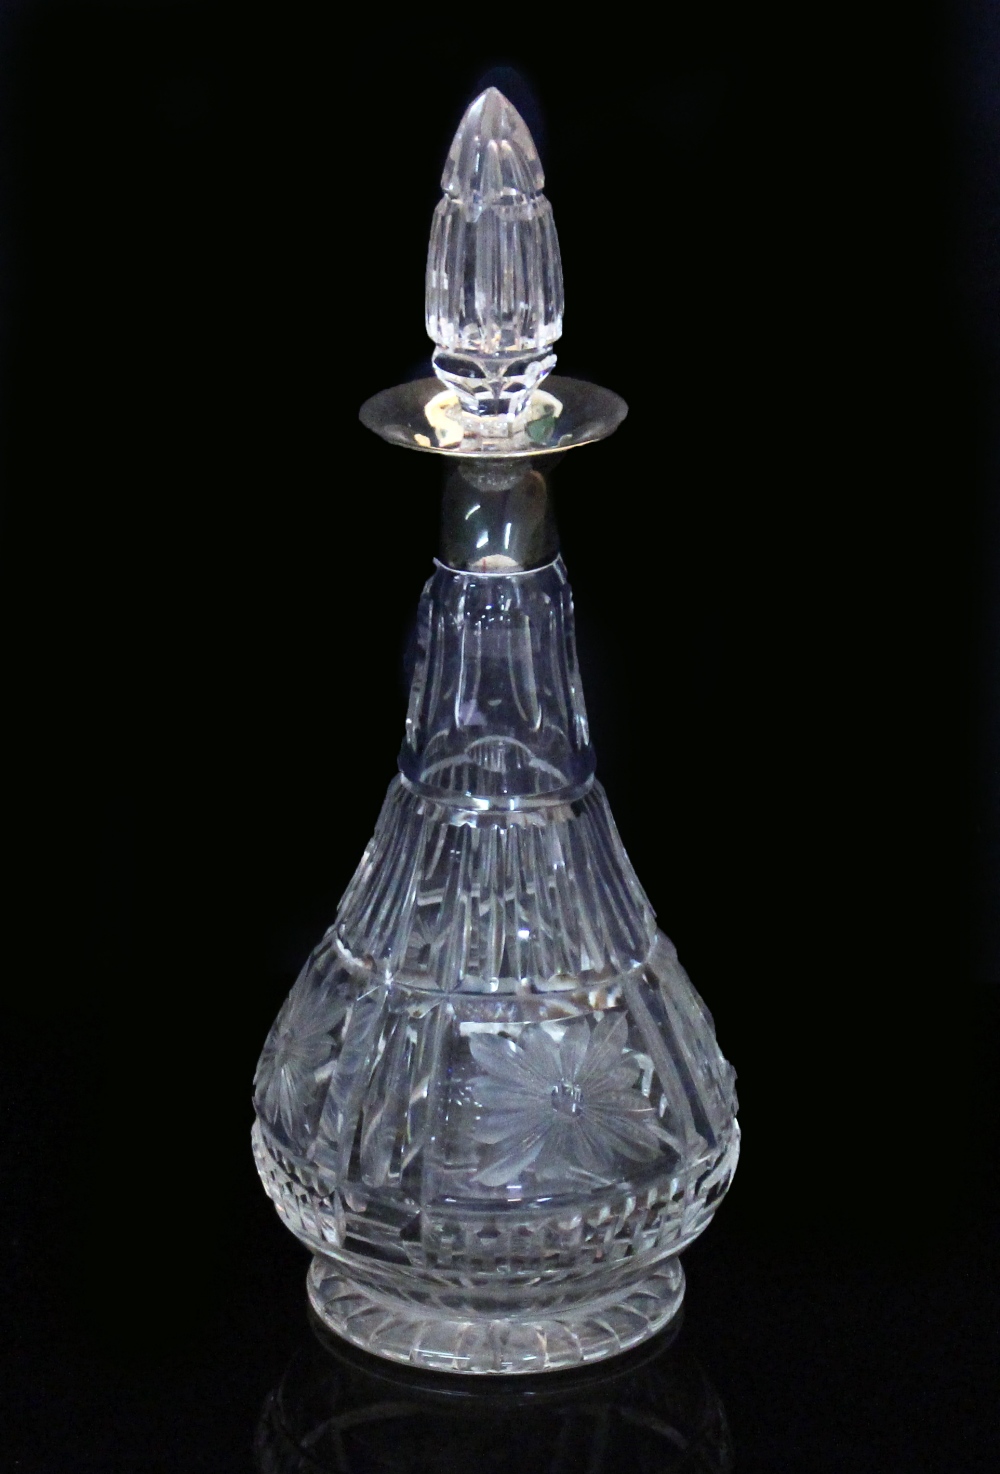 A 20TH CENTURY CUT GLASS WINE DECANTER with silver collar and cut glass stopper, 33cm high overall